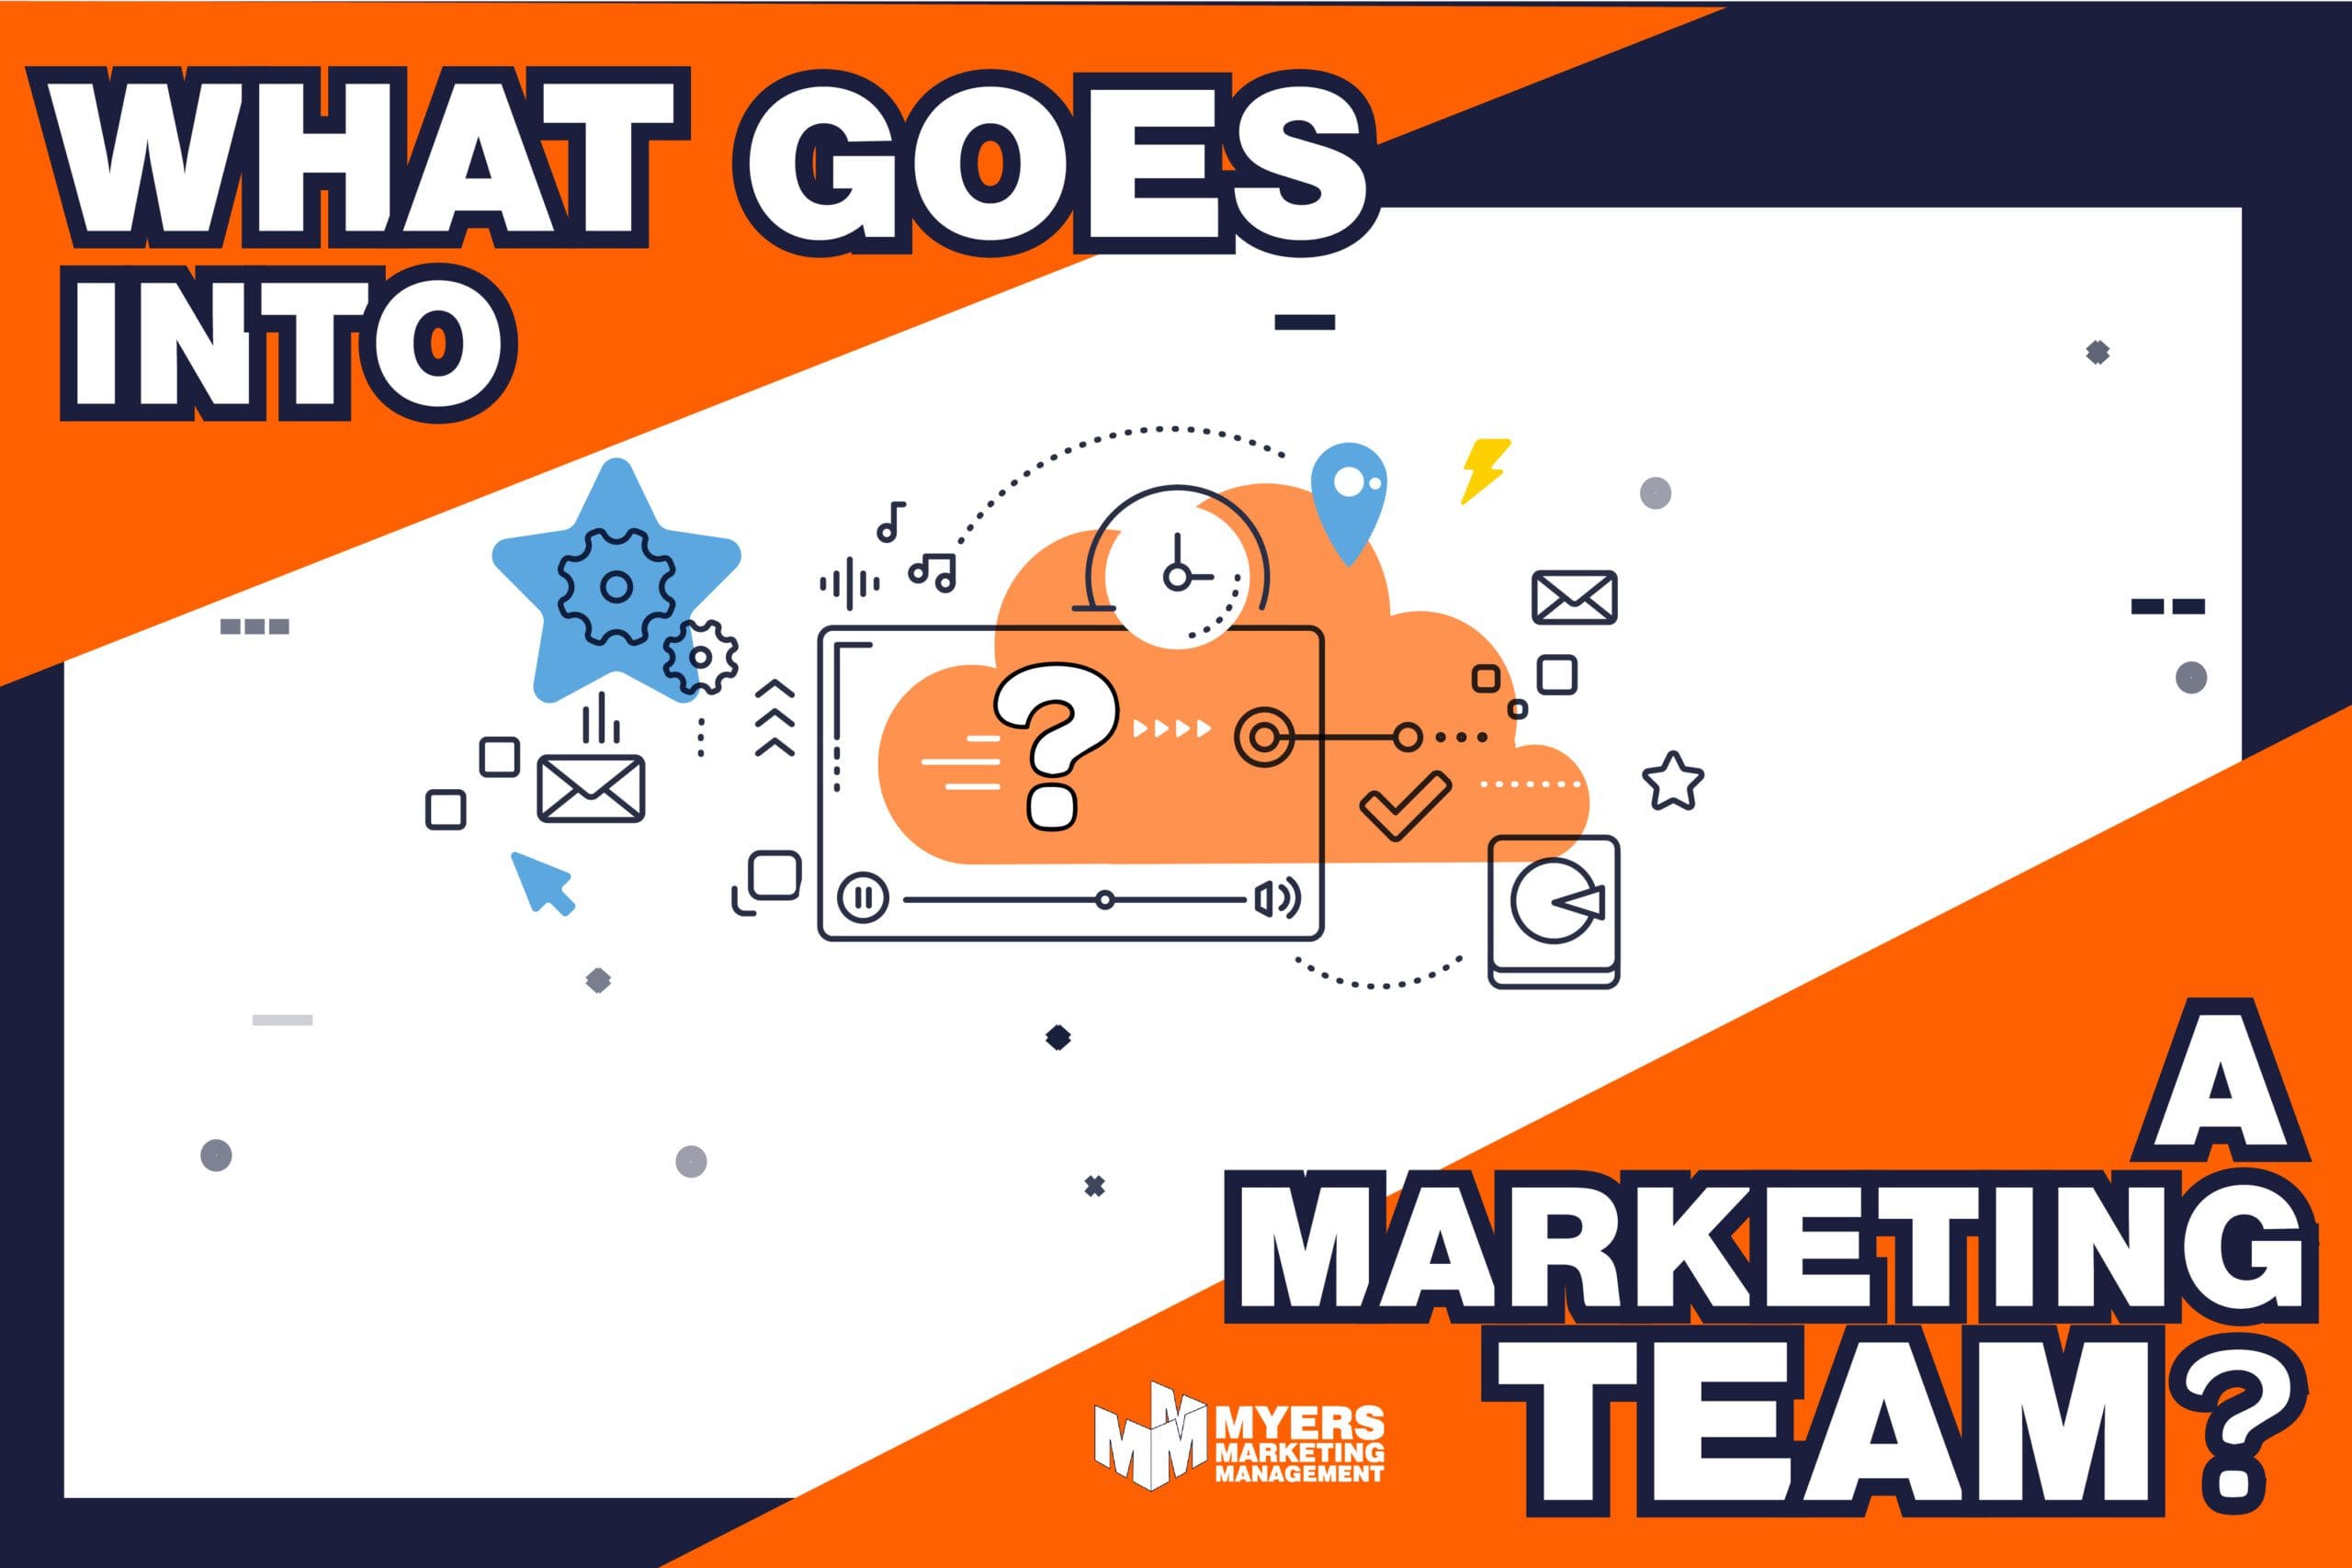 What goes into a Marketing Team?